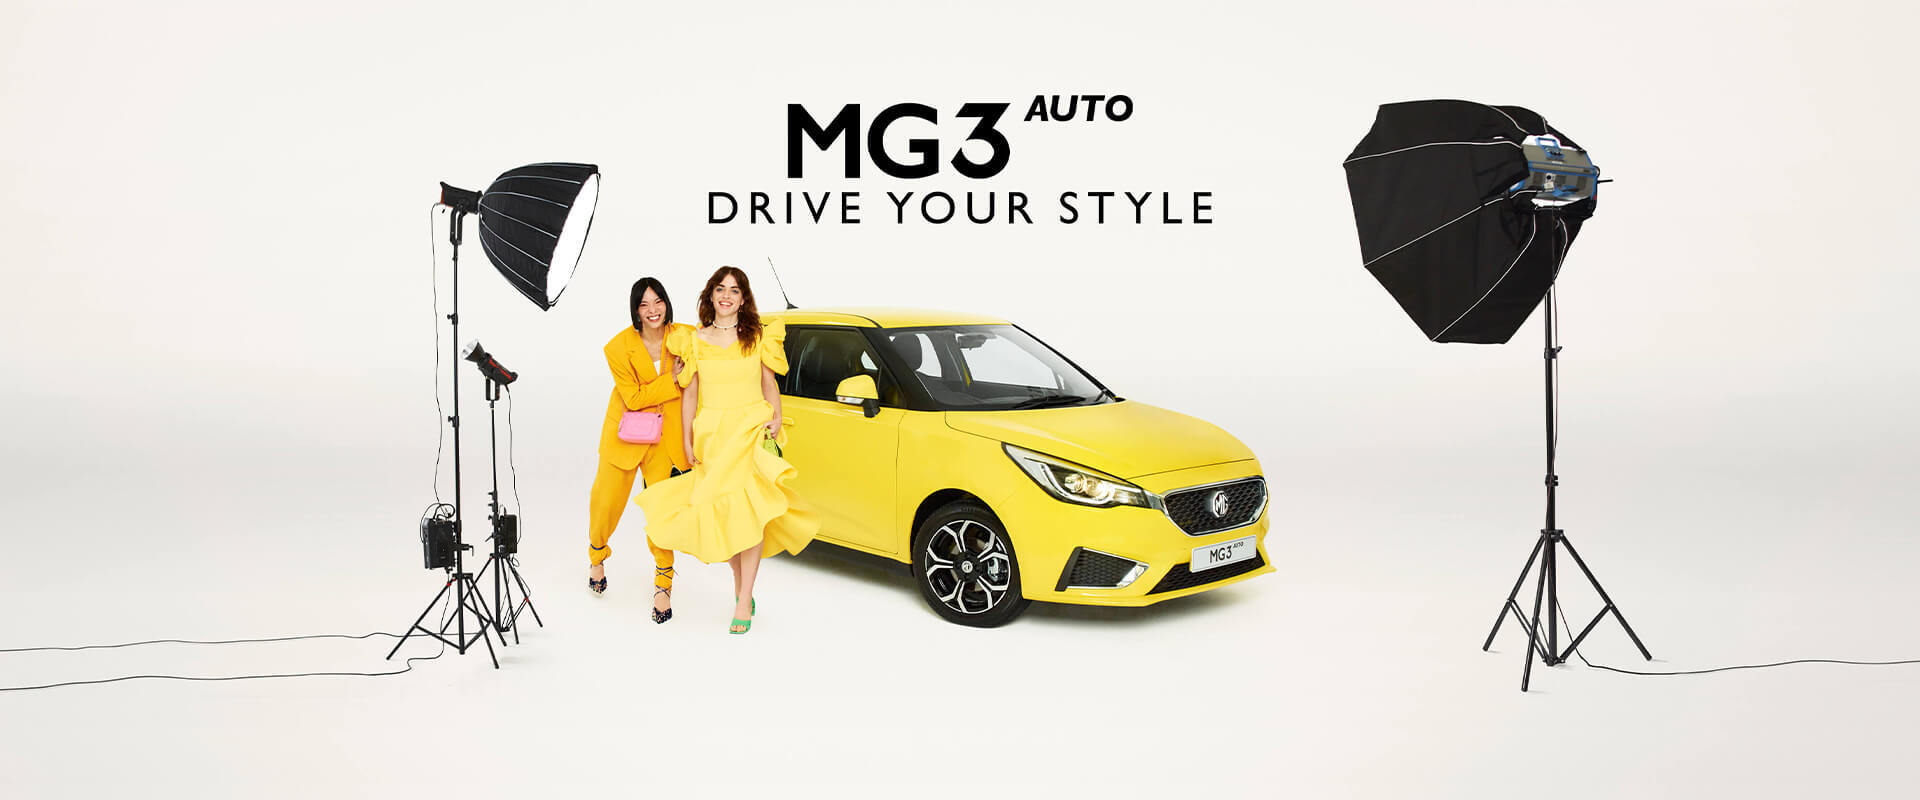 MG3 Generations of Style